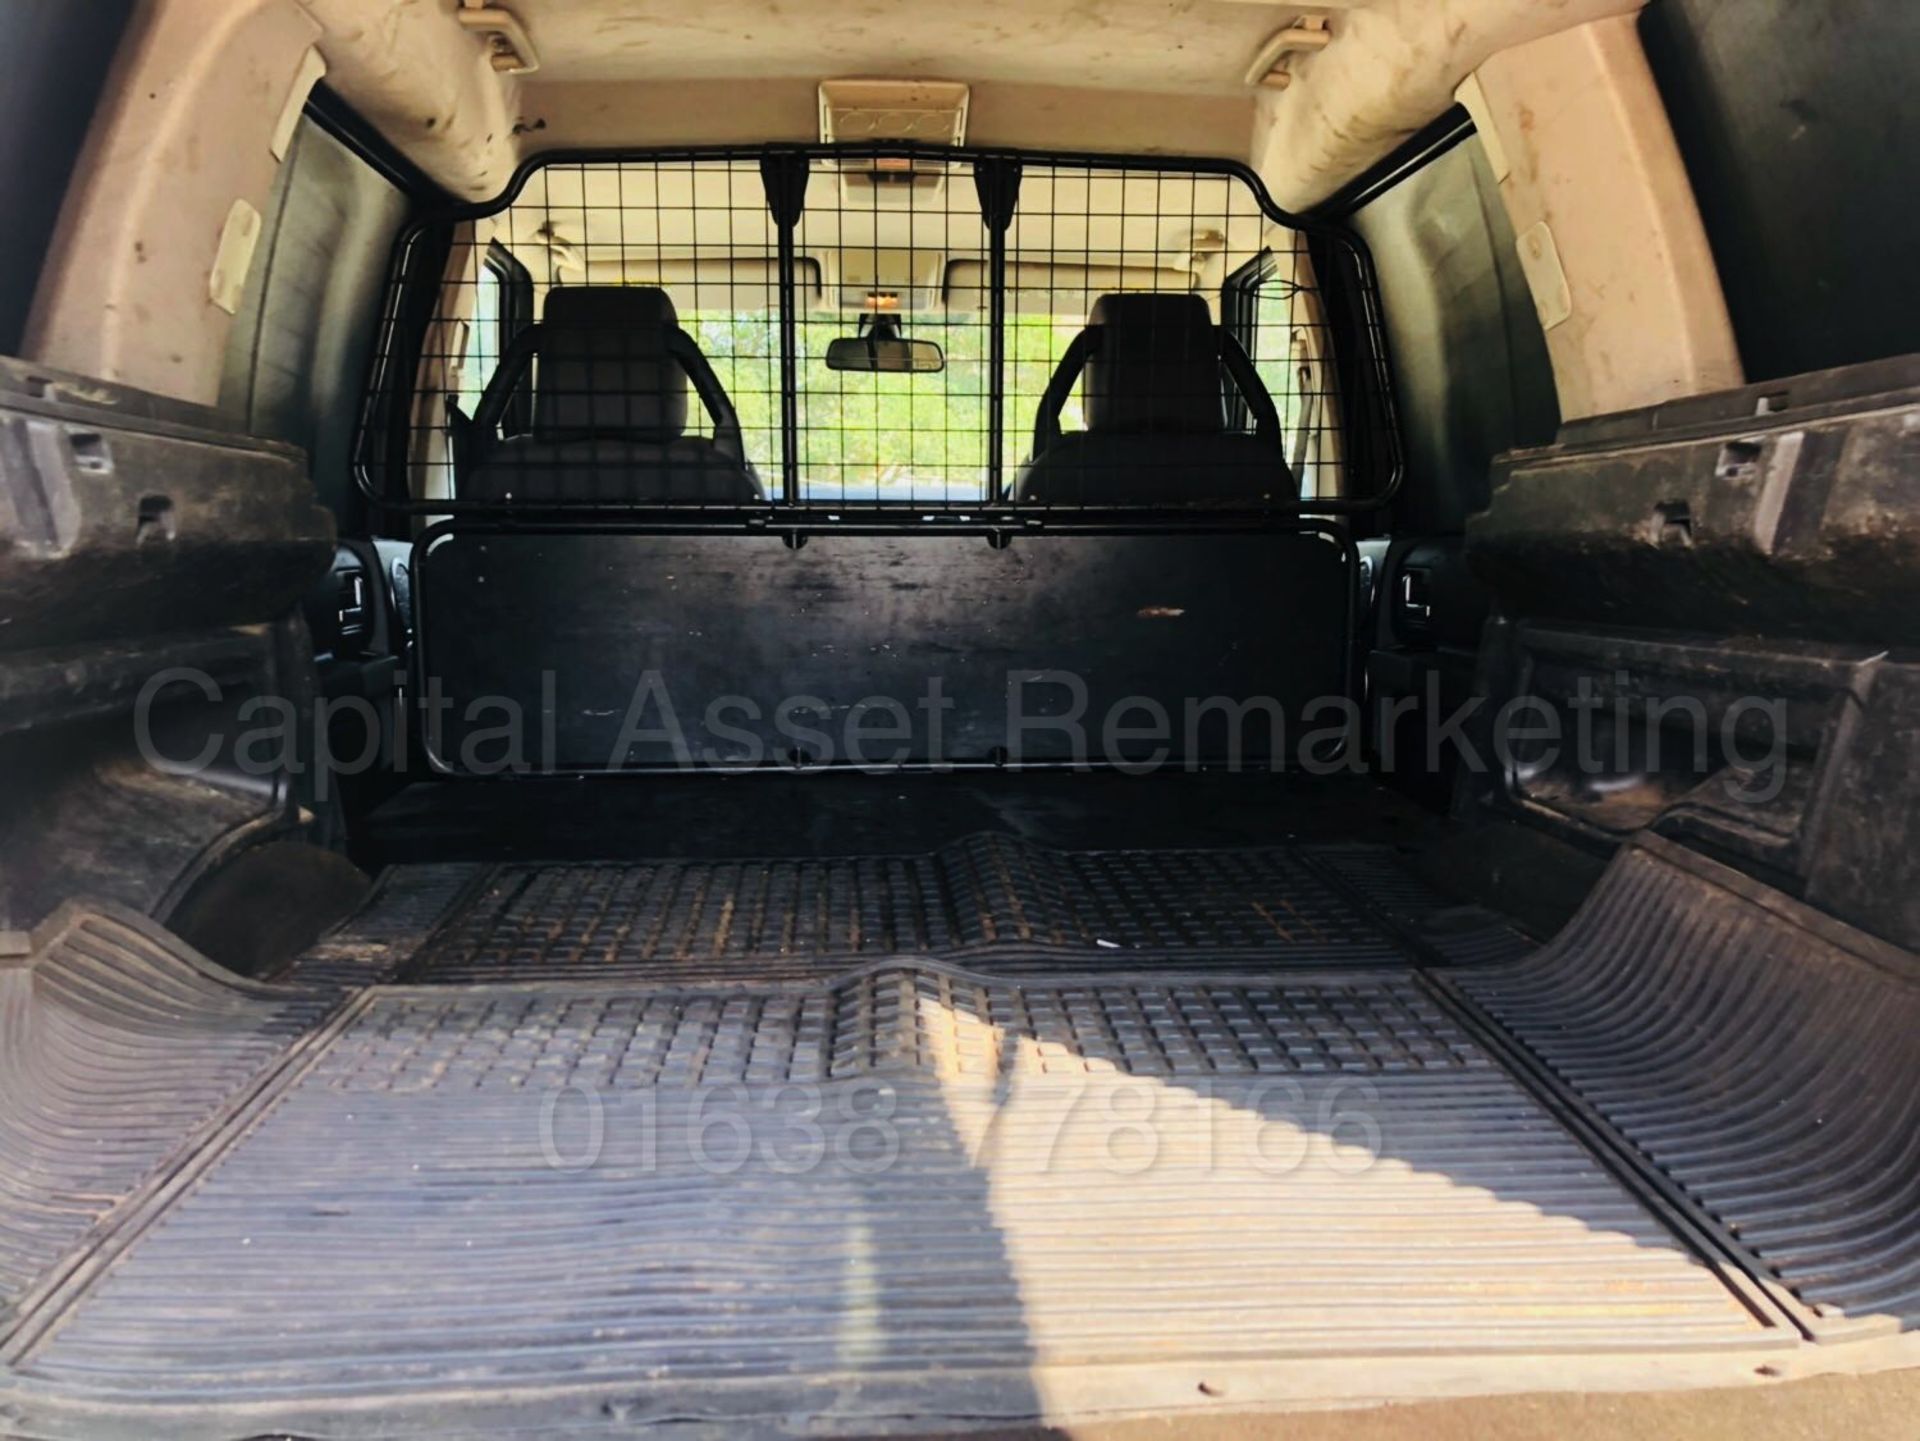 (On Sale) LAND ROVER DISCOVERY 3 'XS EDITION' **COMMERCIAL VAN**(2008 MODEL) 'TDV6-190 BHP' (NO VAT) - Image 29 of 37